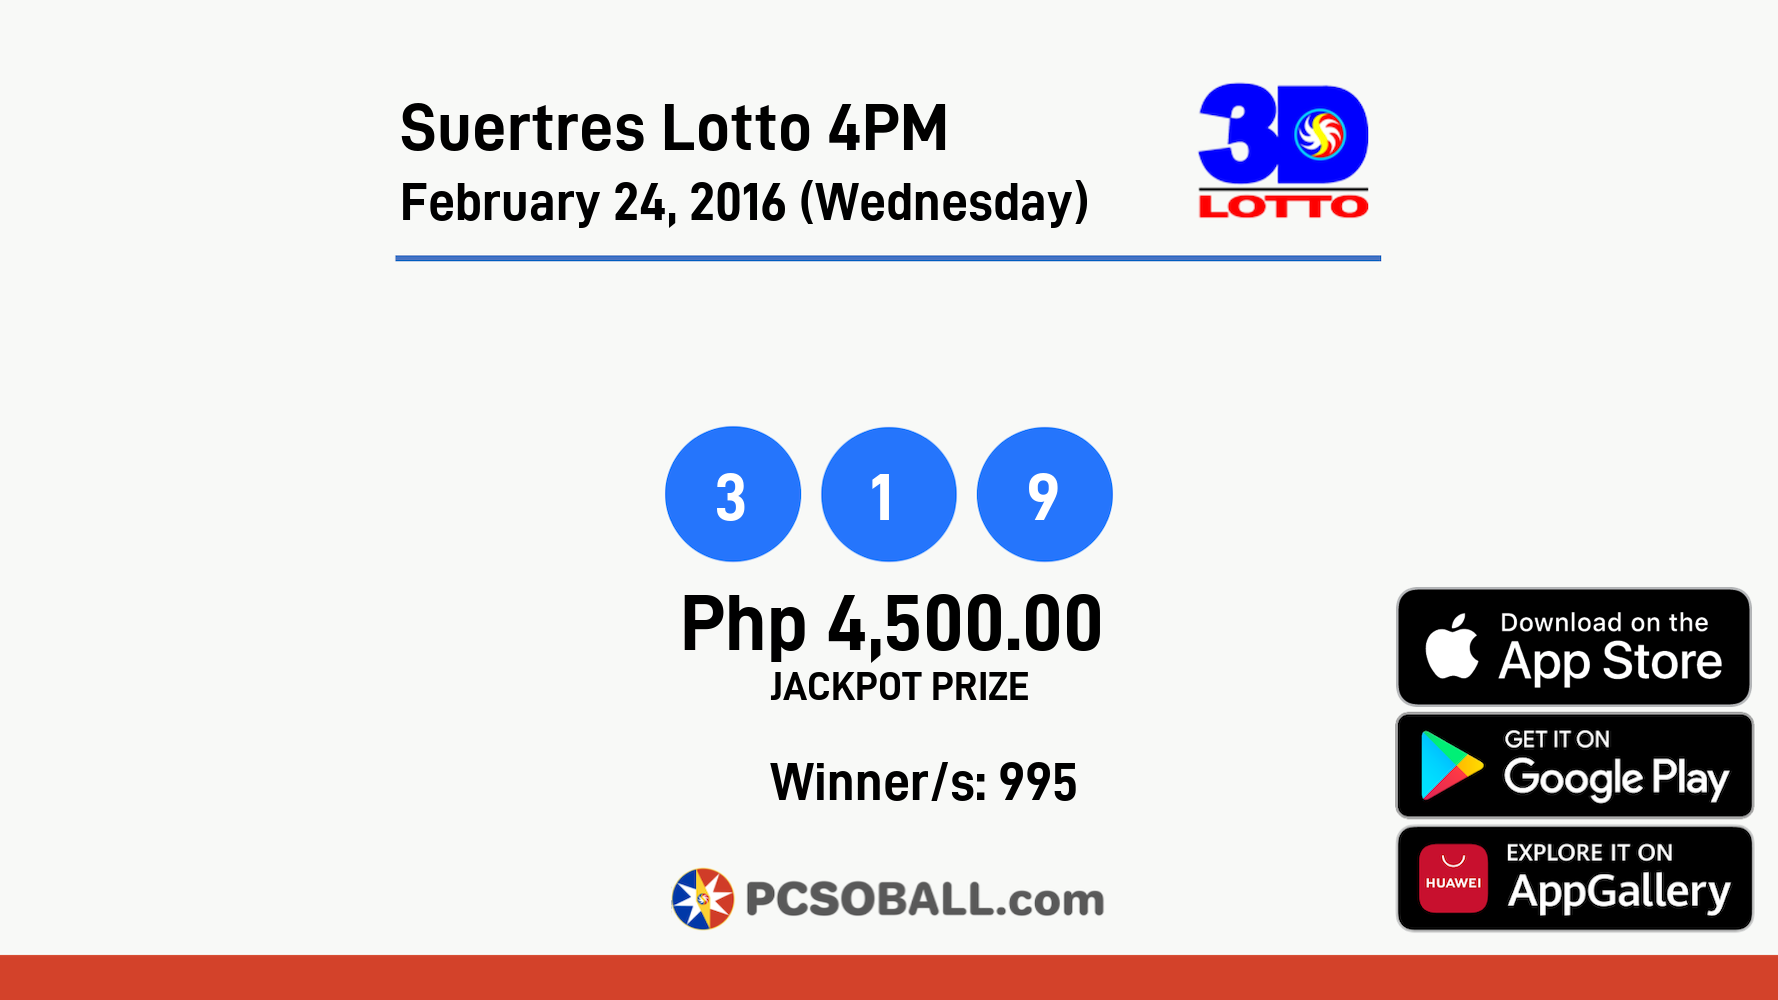 Suertres Lotto 4PM February 24, 2016 (Wednesday) Result